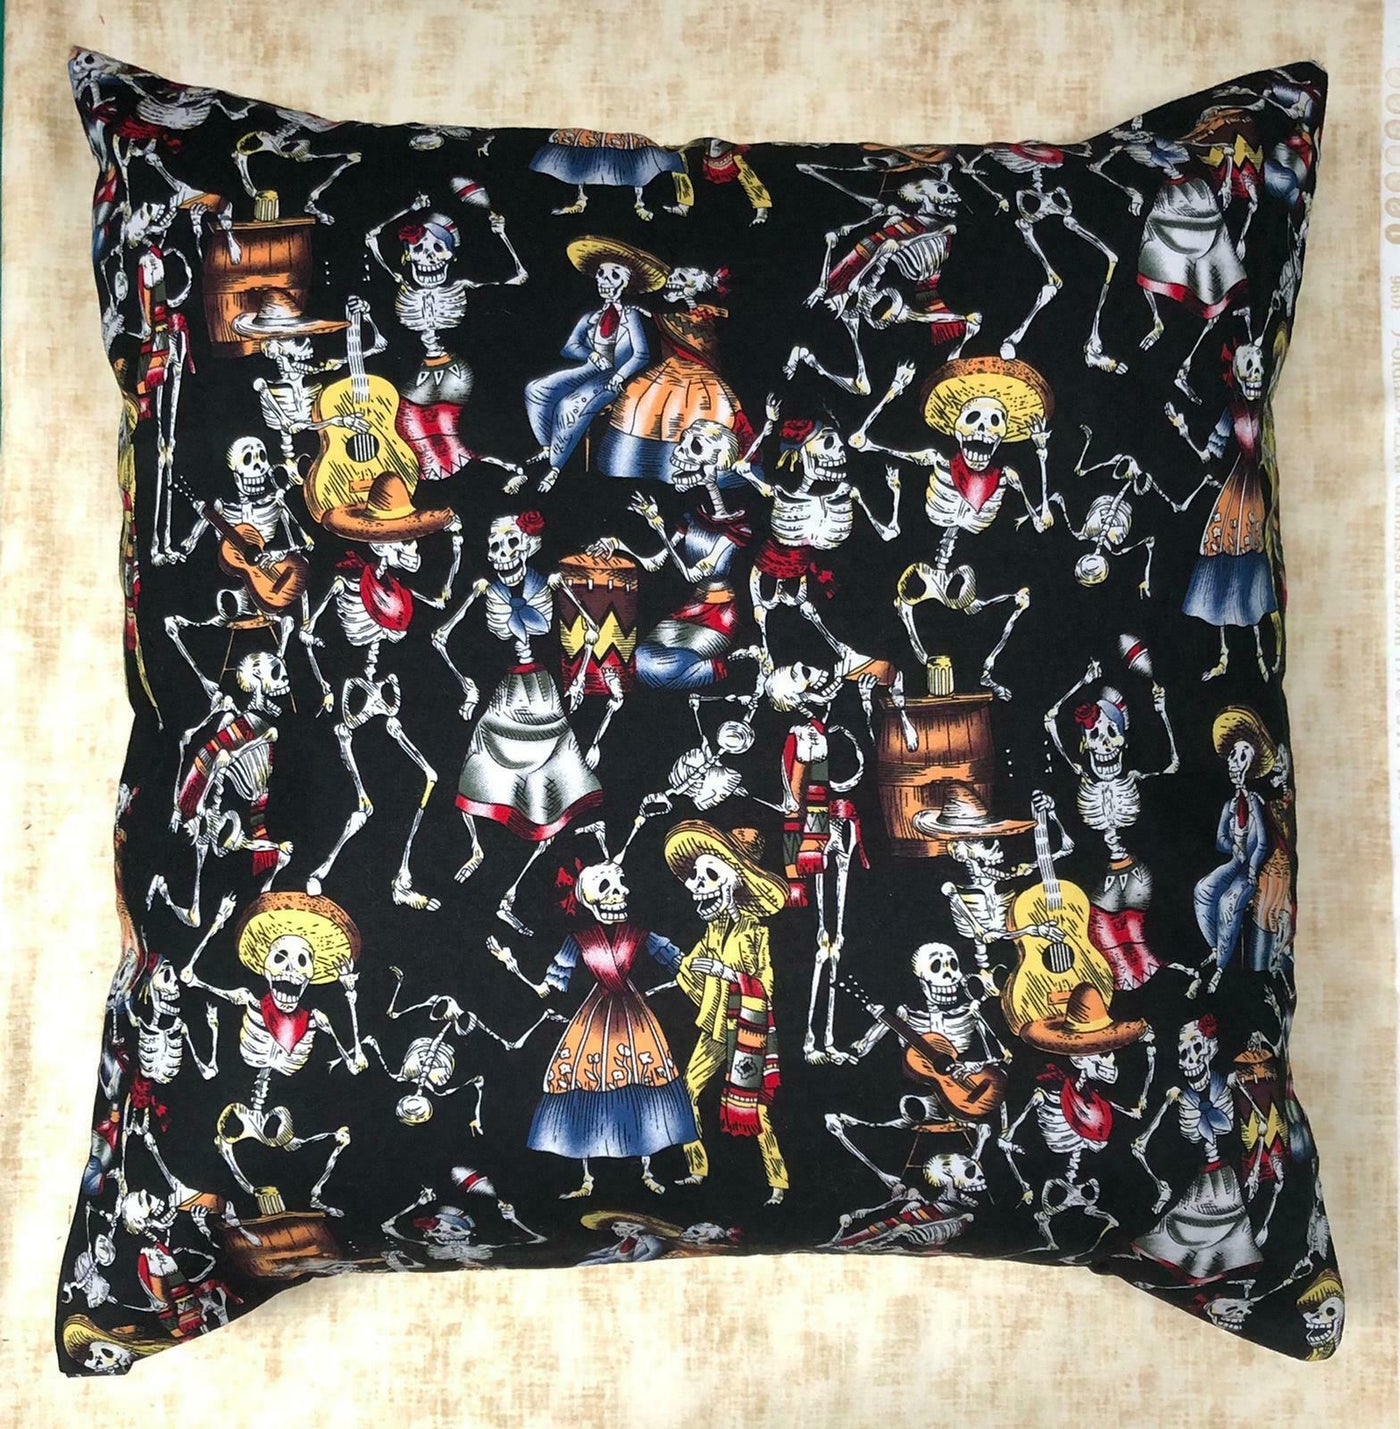 Day of the Dead Skeleton Band Cushion Cover Sofa Decorative Case to fit 18"x18"